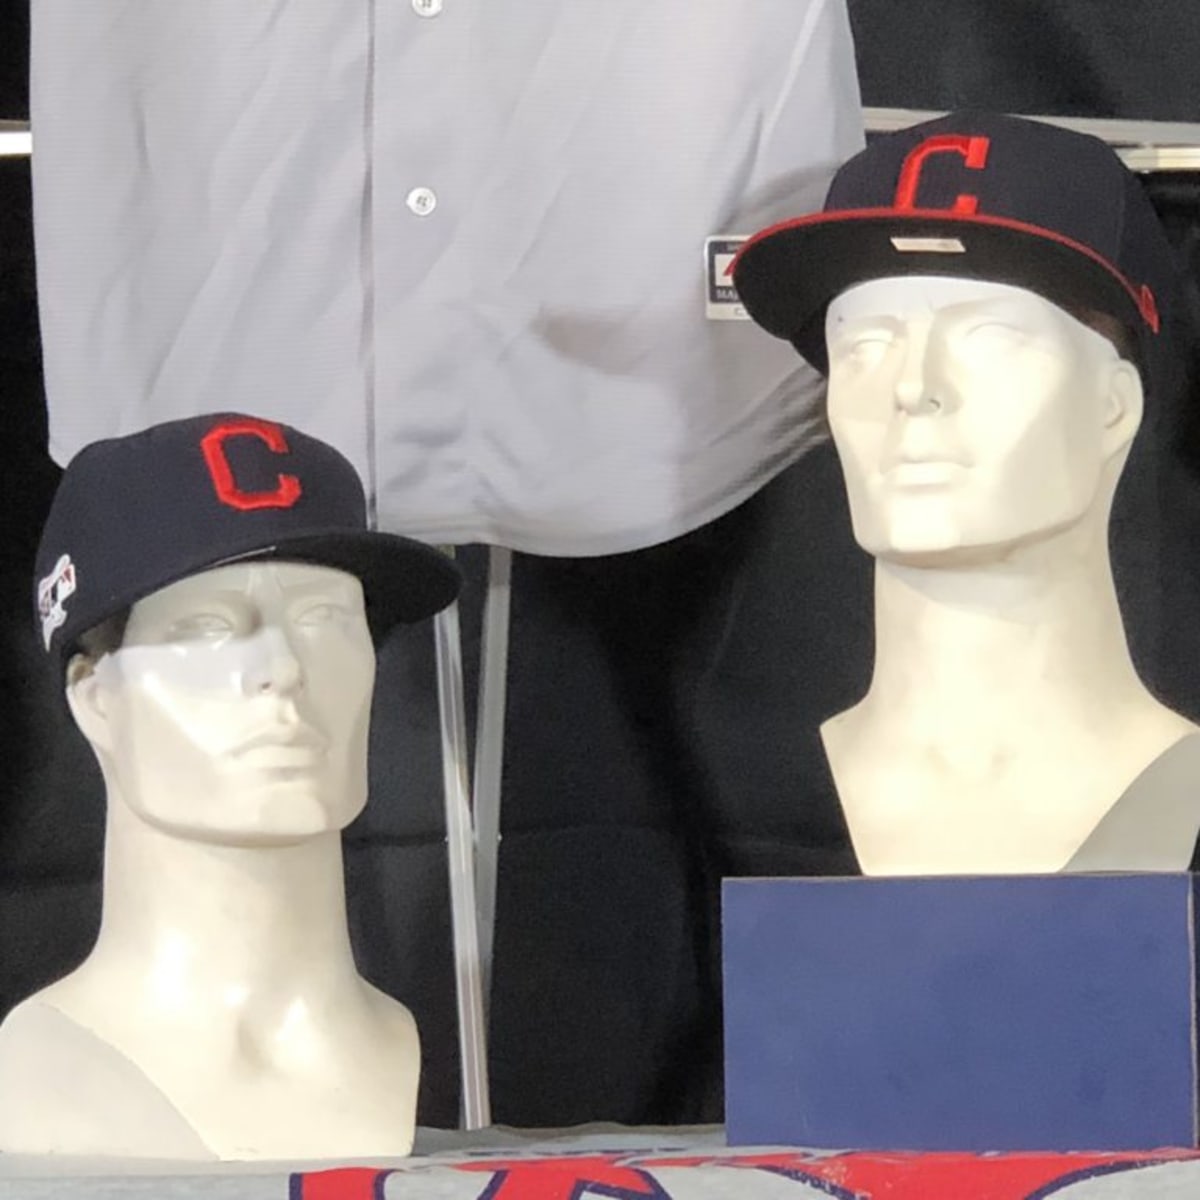 Indians unveil 2019 uniforms with red jerseys